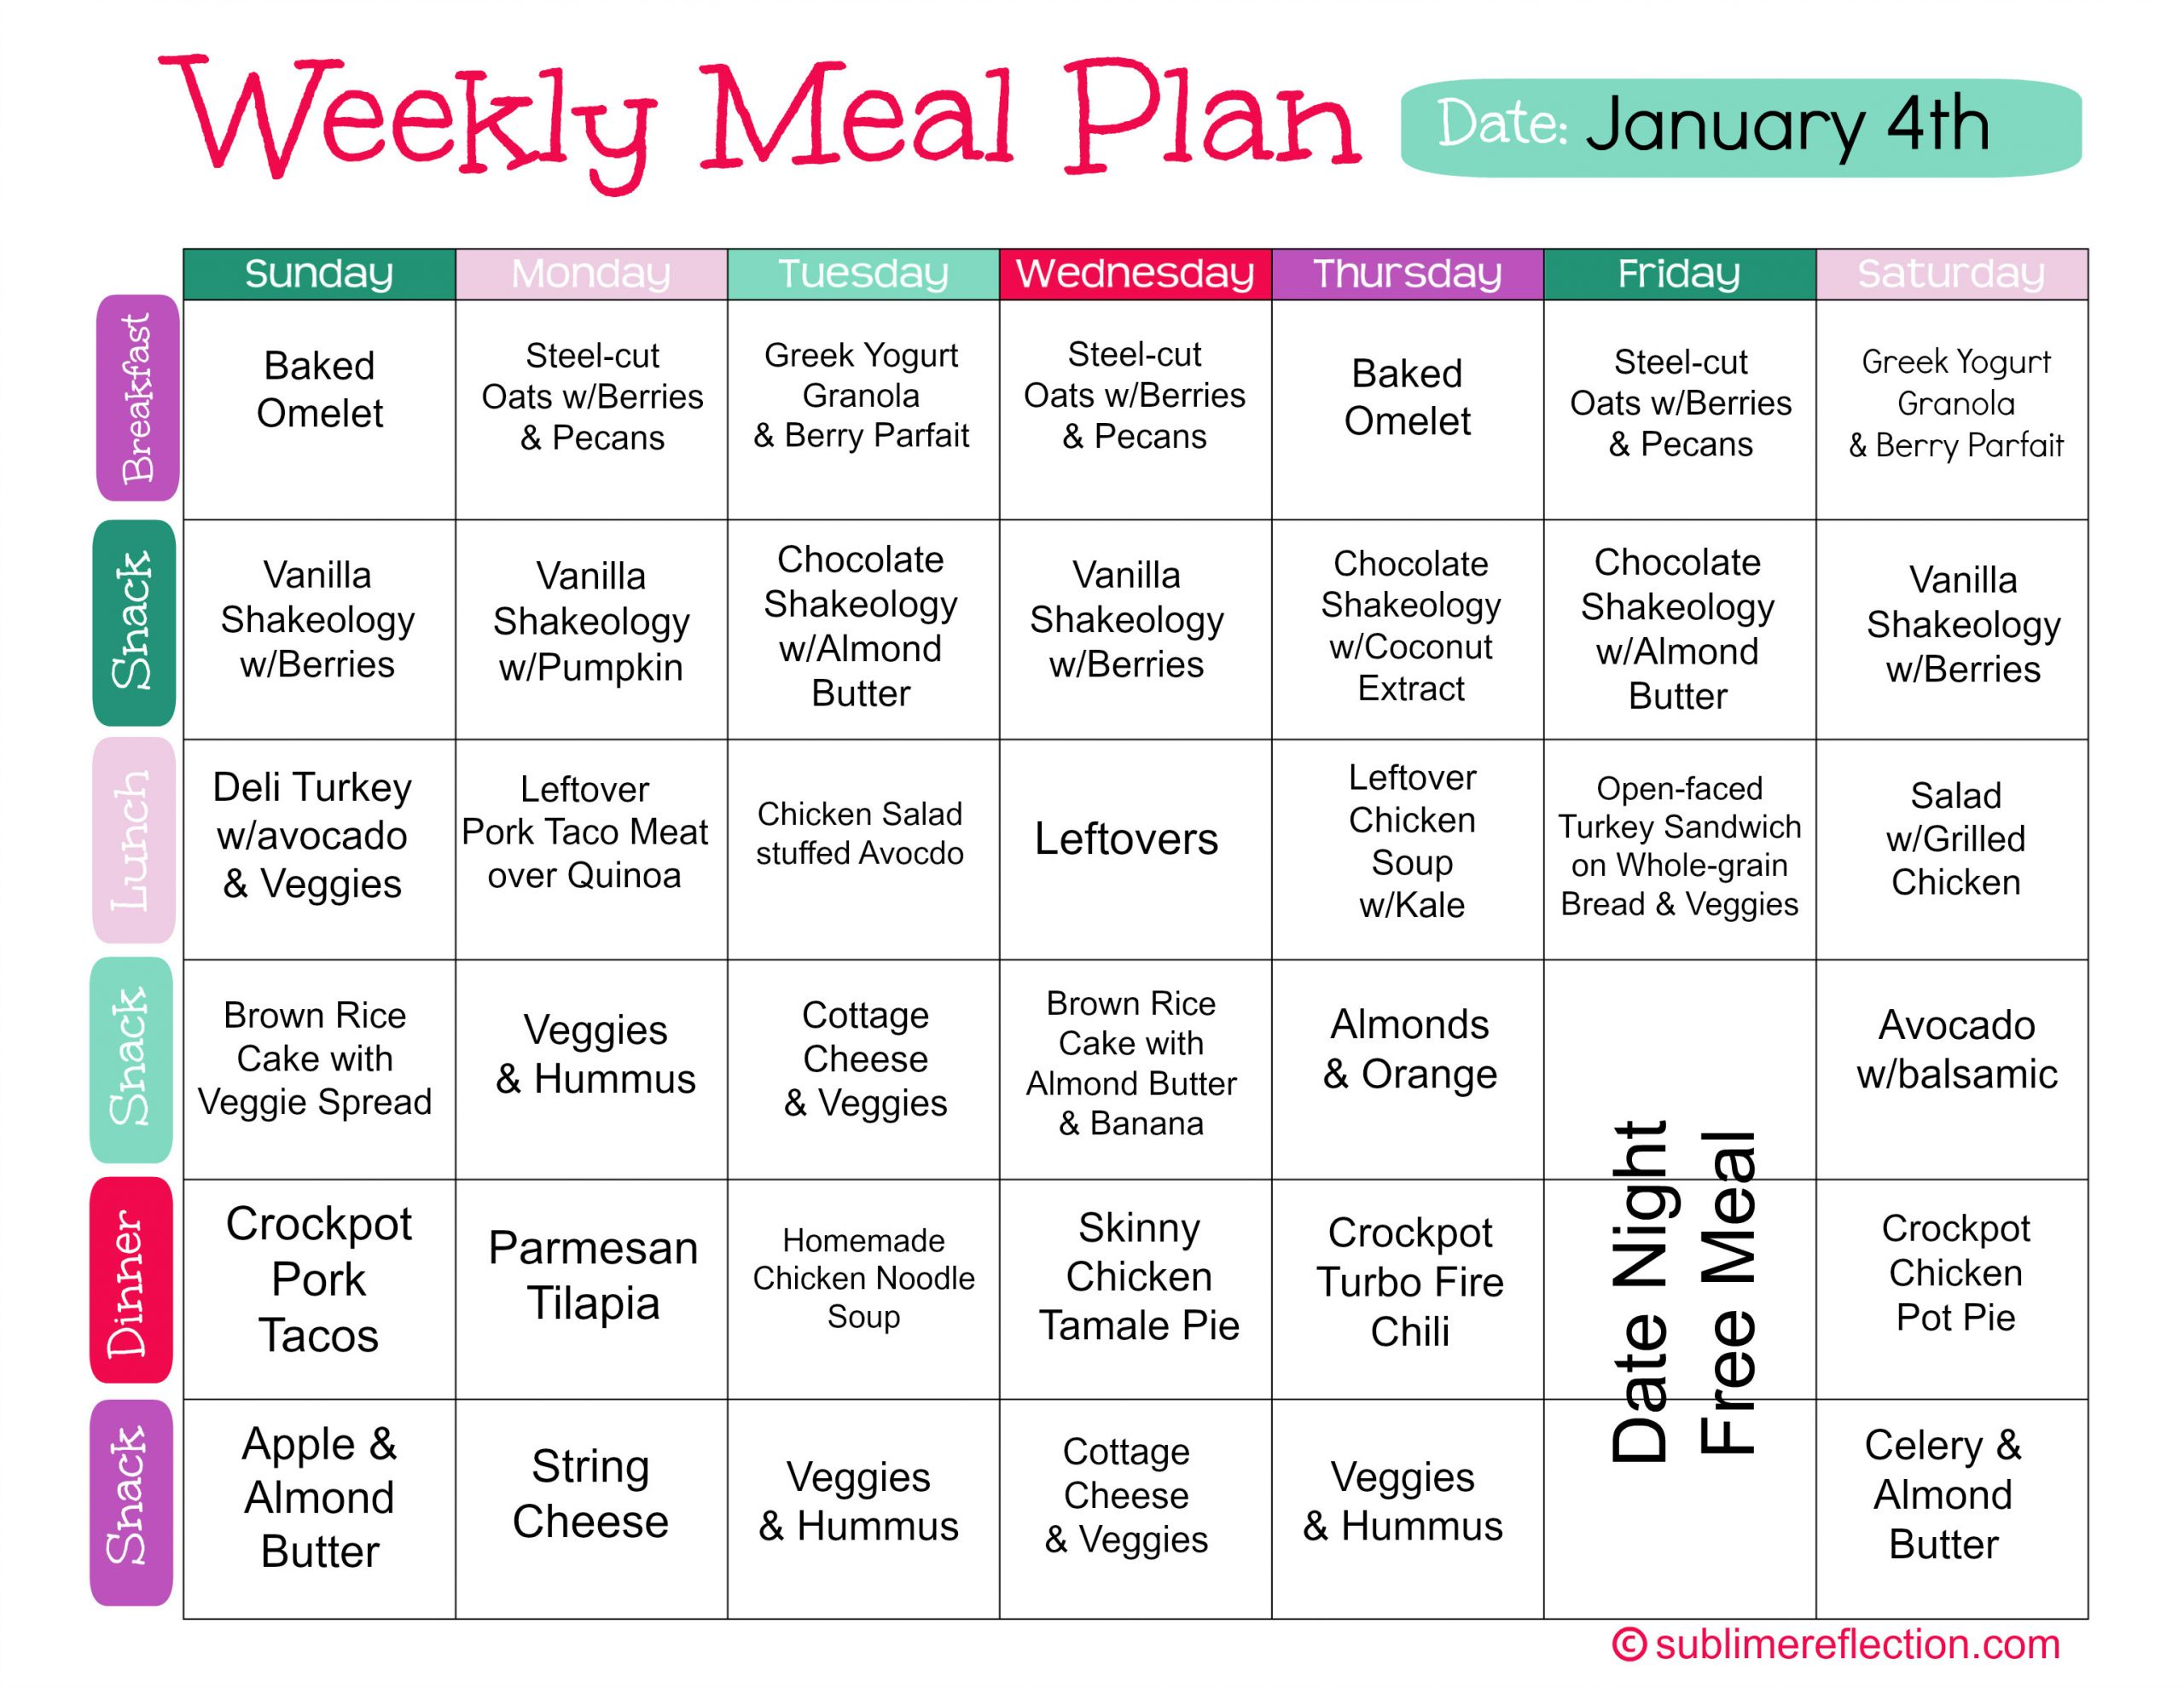 Examples Of Clean Eating
 Transitioning Your Family to a Clean Eating Meal Plan